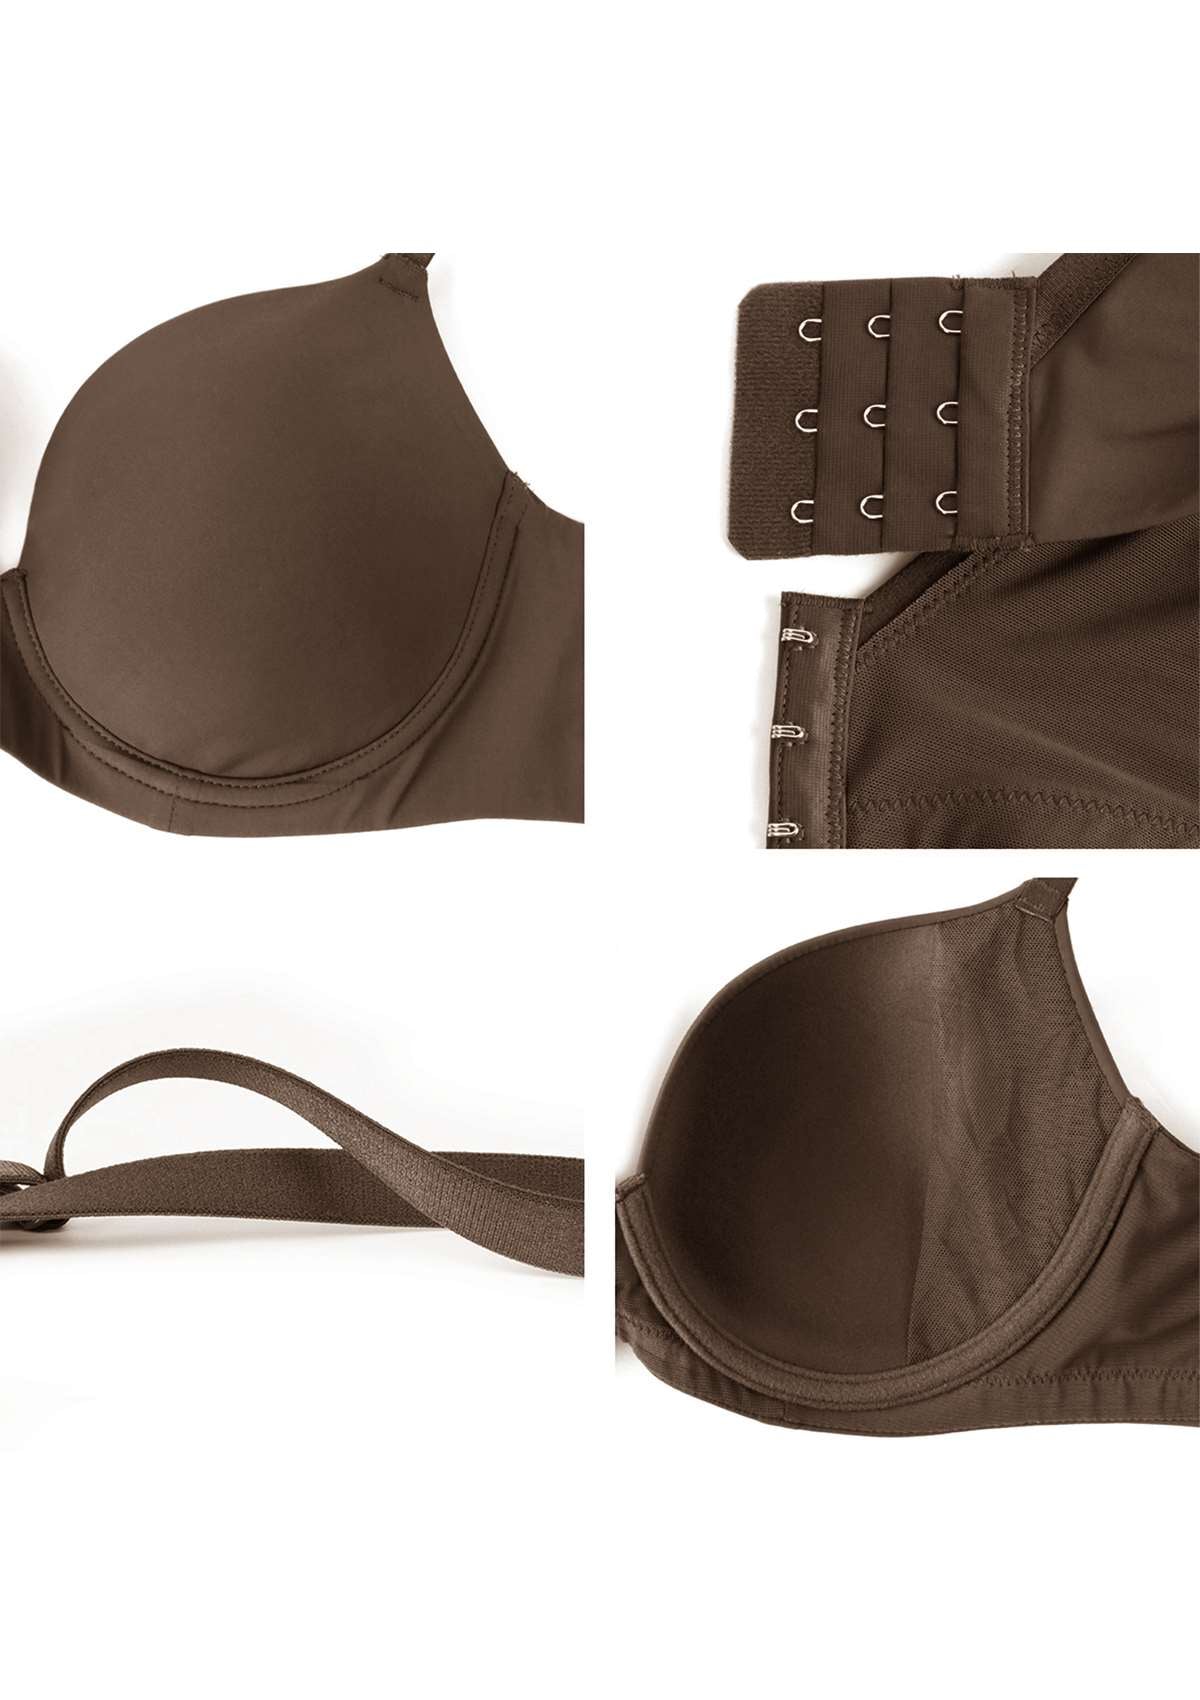 HSIA Gemma Smooth Supportive Padded T-shirt Bra - For Full Figures - Cocoa Brown / 34 / DD/E